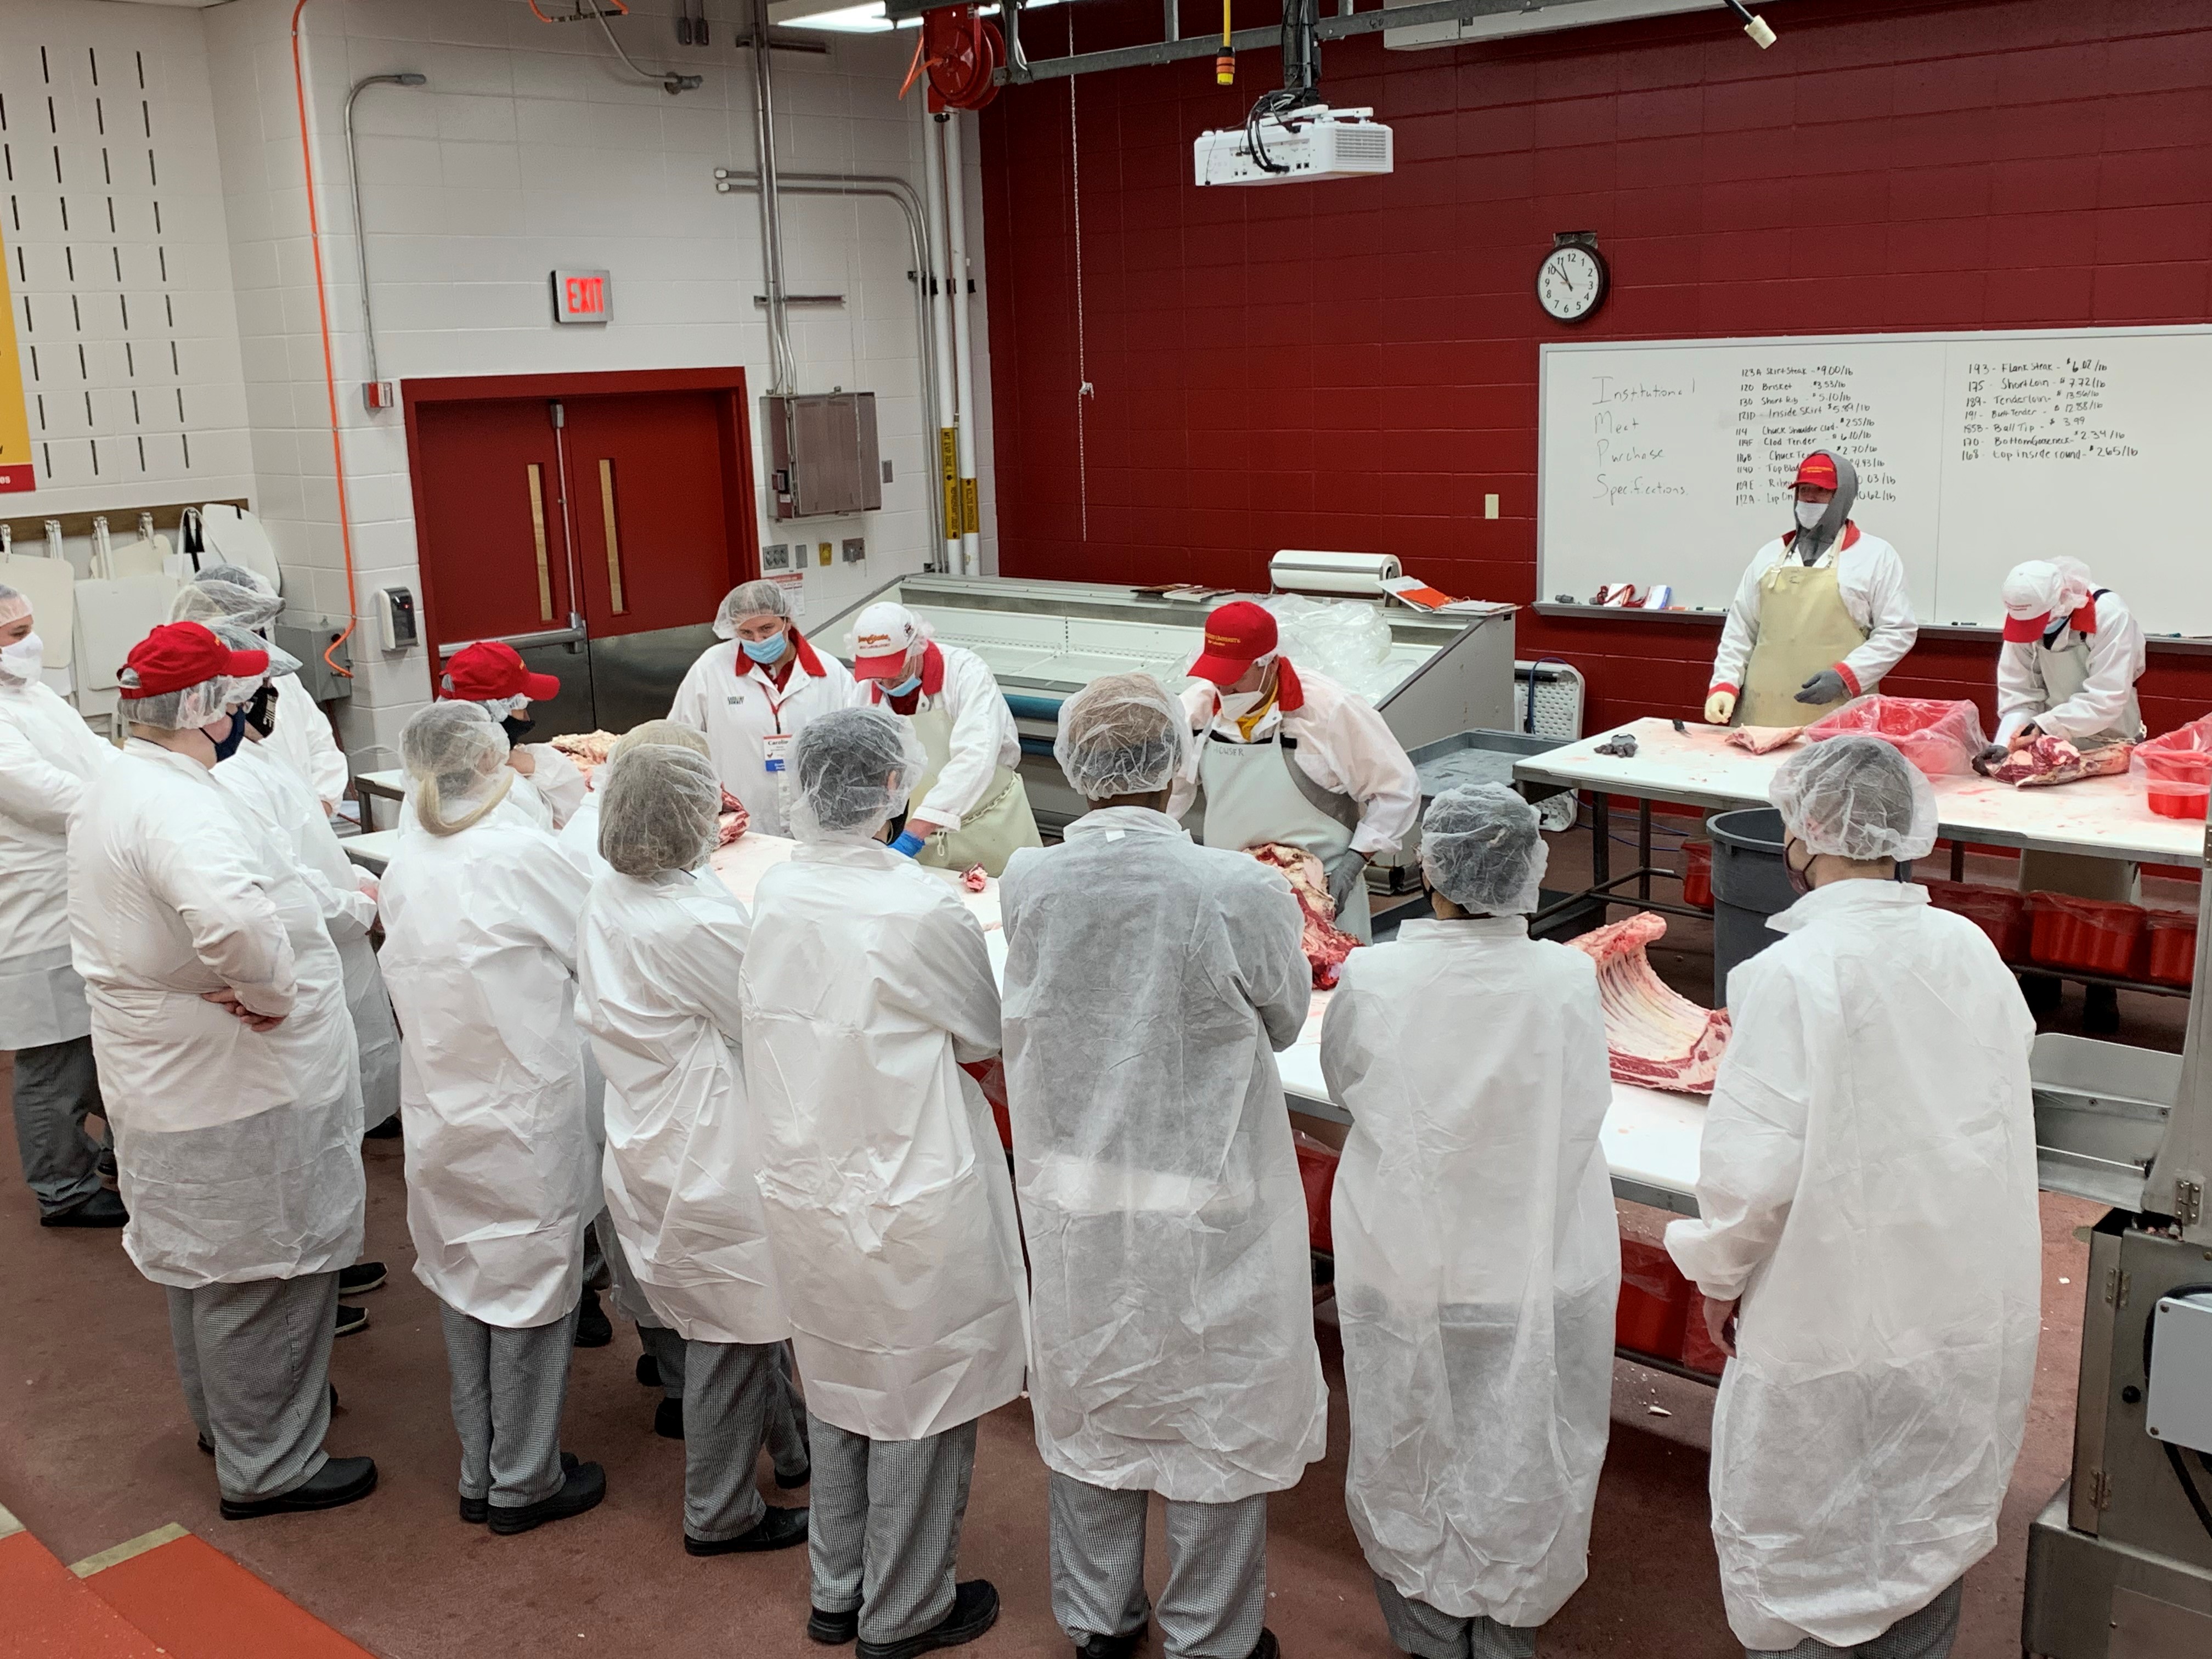 Beef 101 Workshop Held for DMACC Culinary Students